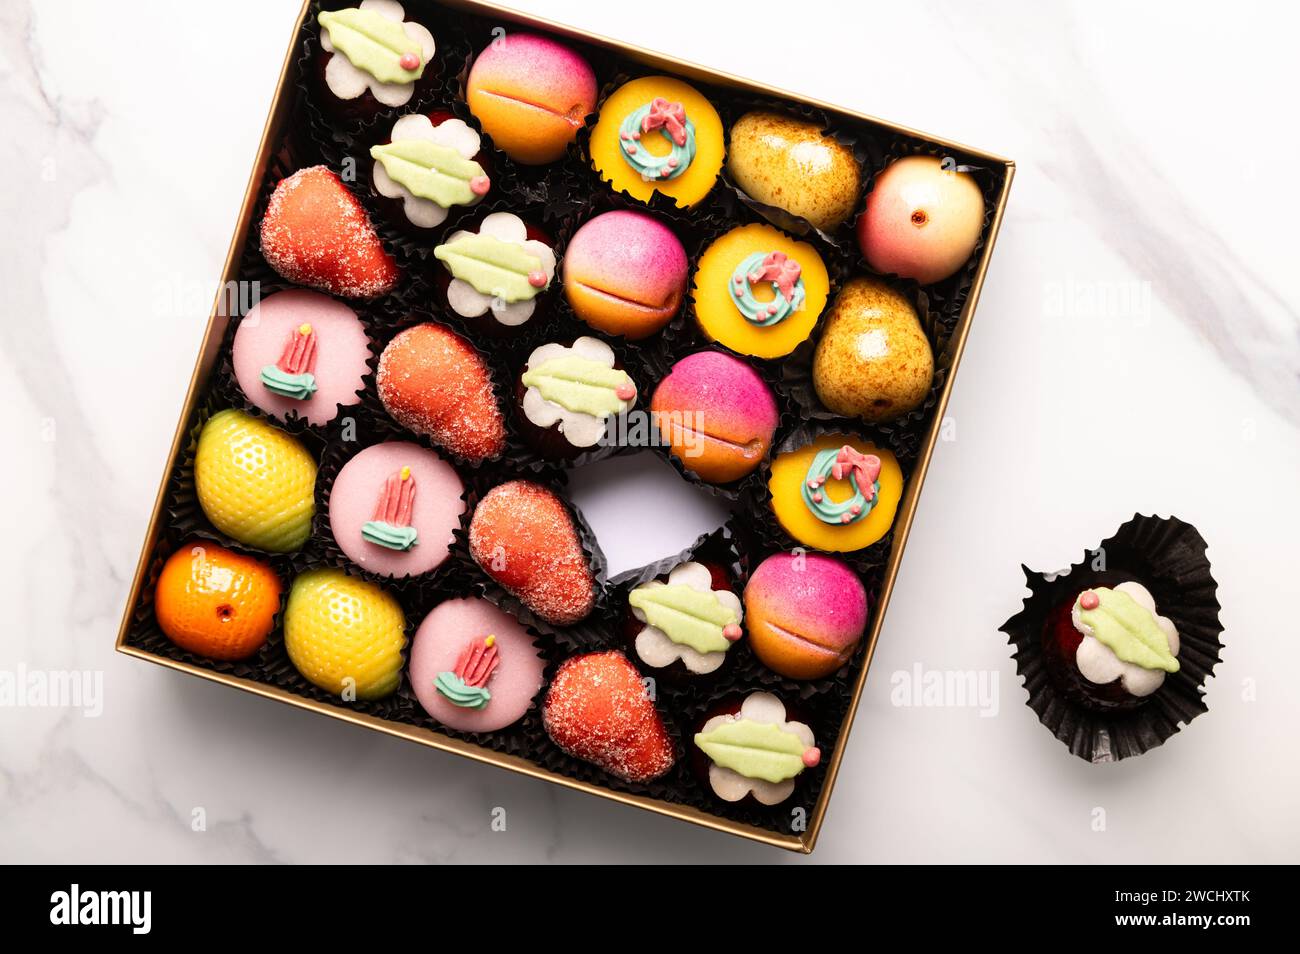 Marzipan sweets as fruits Stock Photo